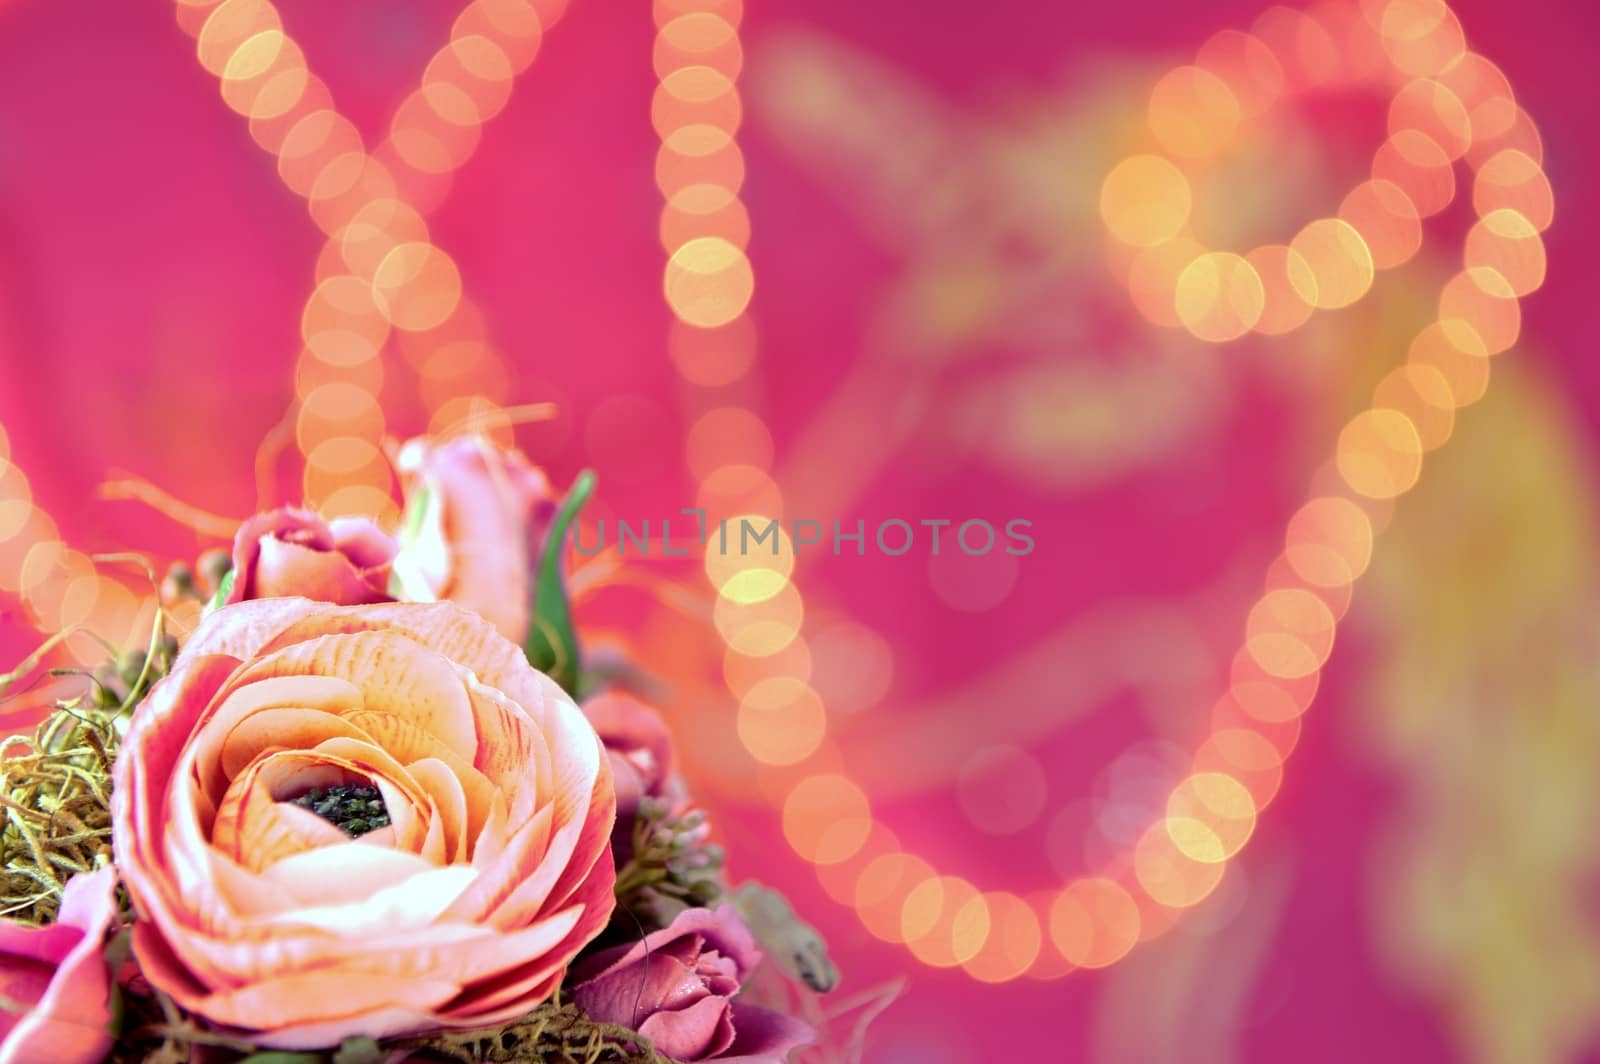 Pink background with lights and a flower